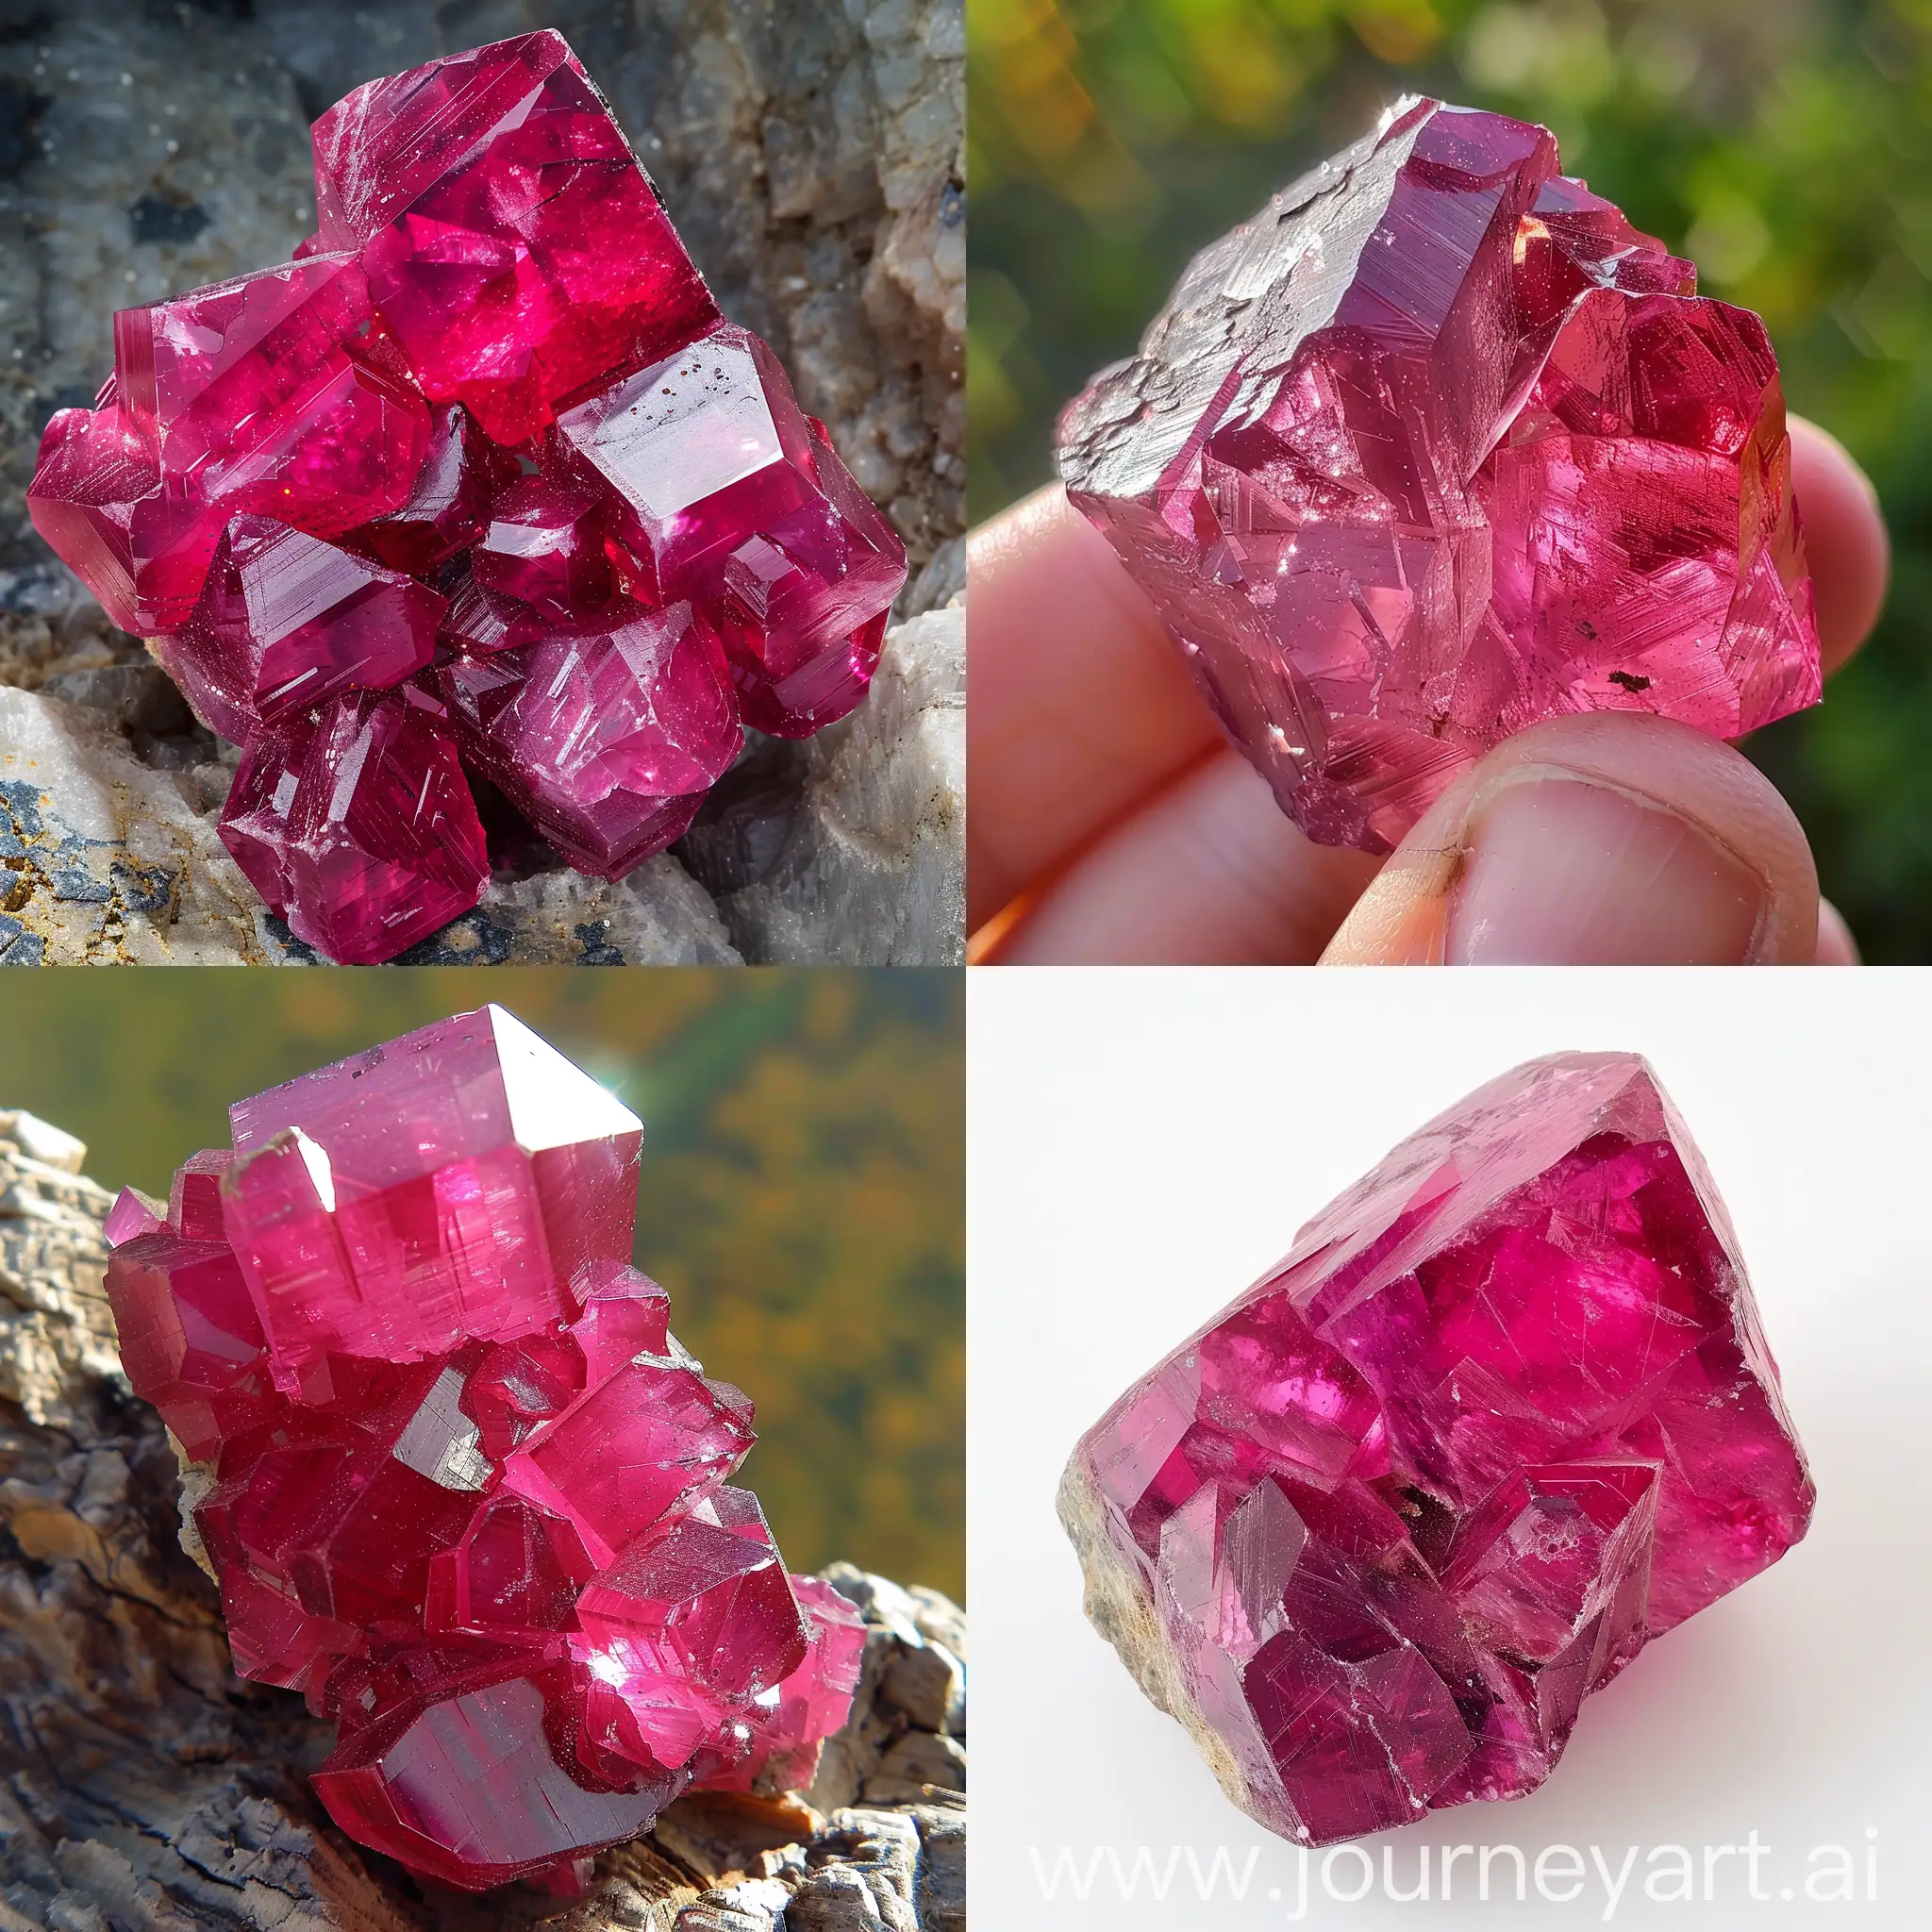 Vibrant-Ruby-Crystal-Formation-Displaying-Stunning-Beauty